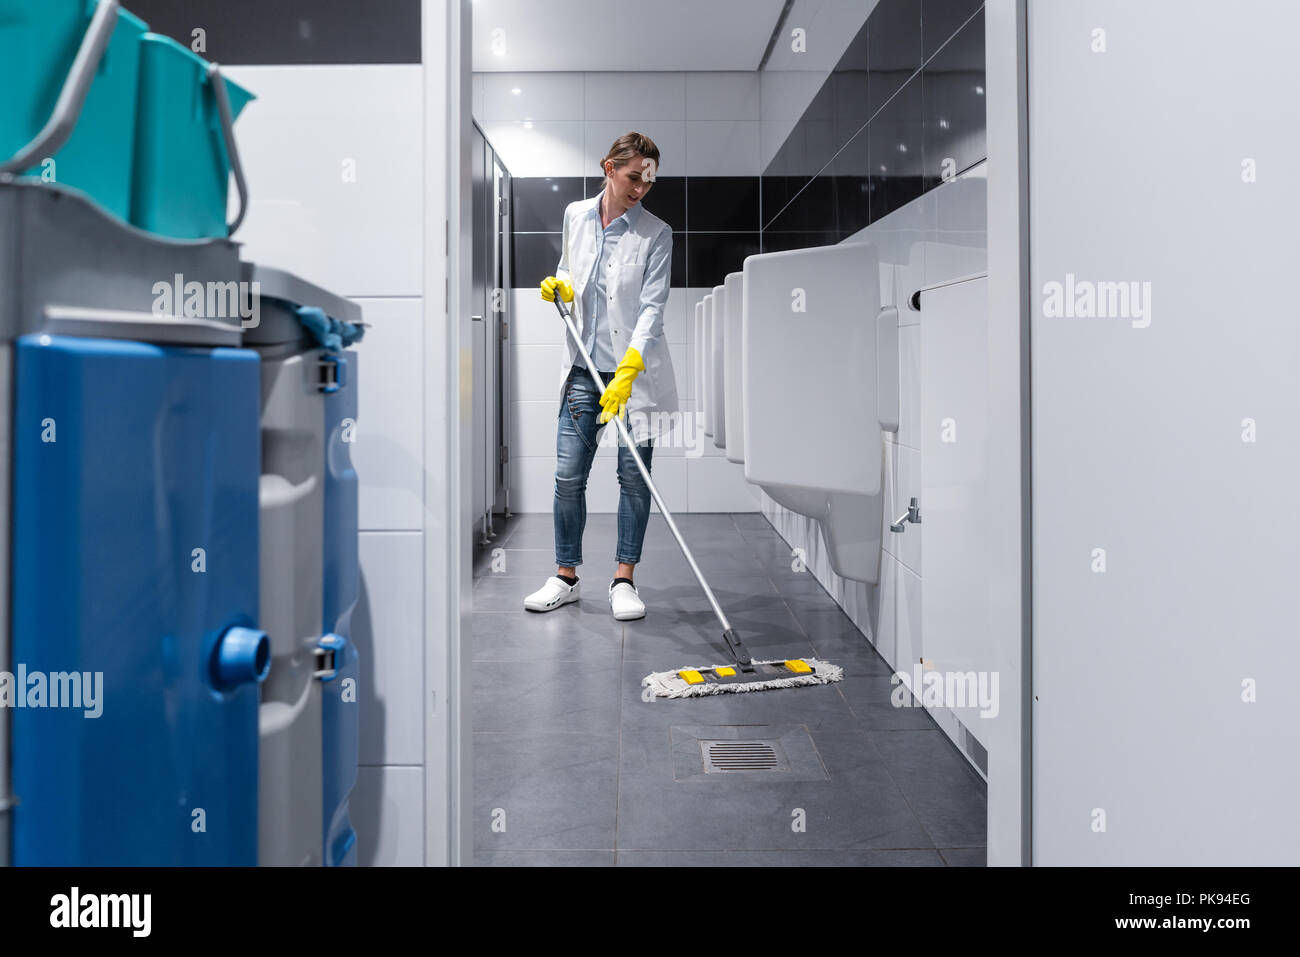 Cleaning lady mopping the floor in mens restroom Stock Photo